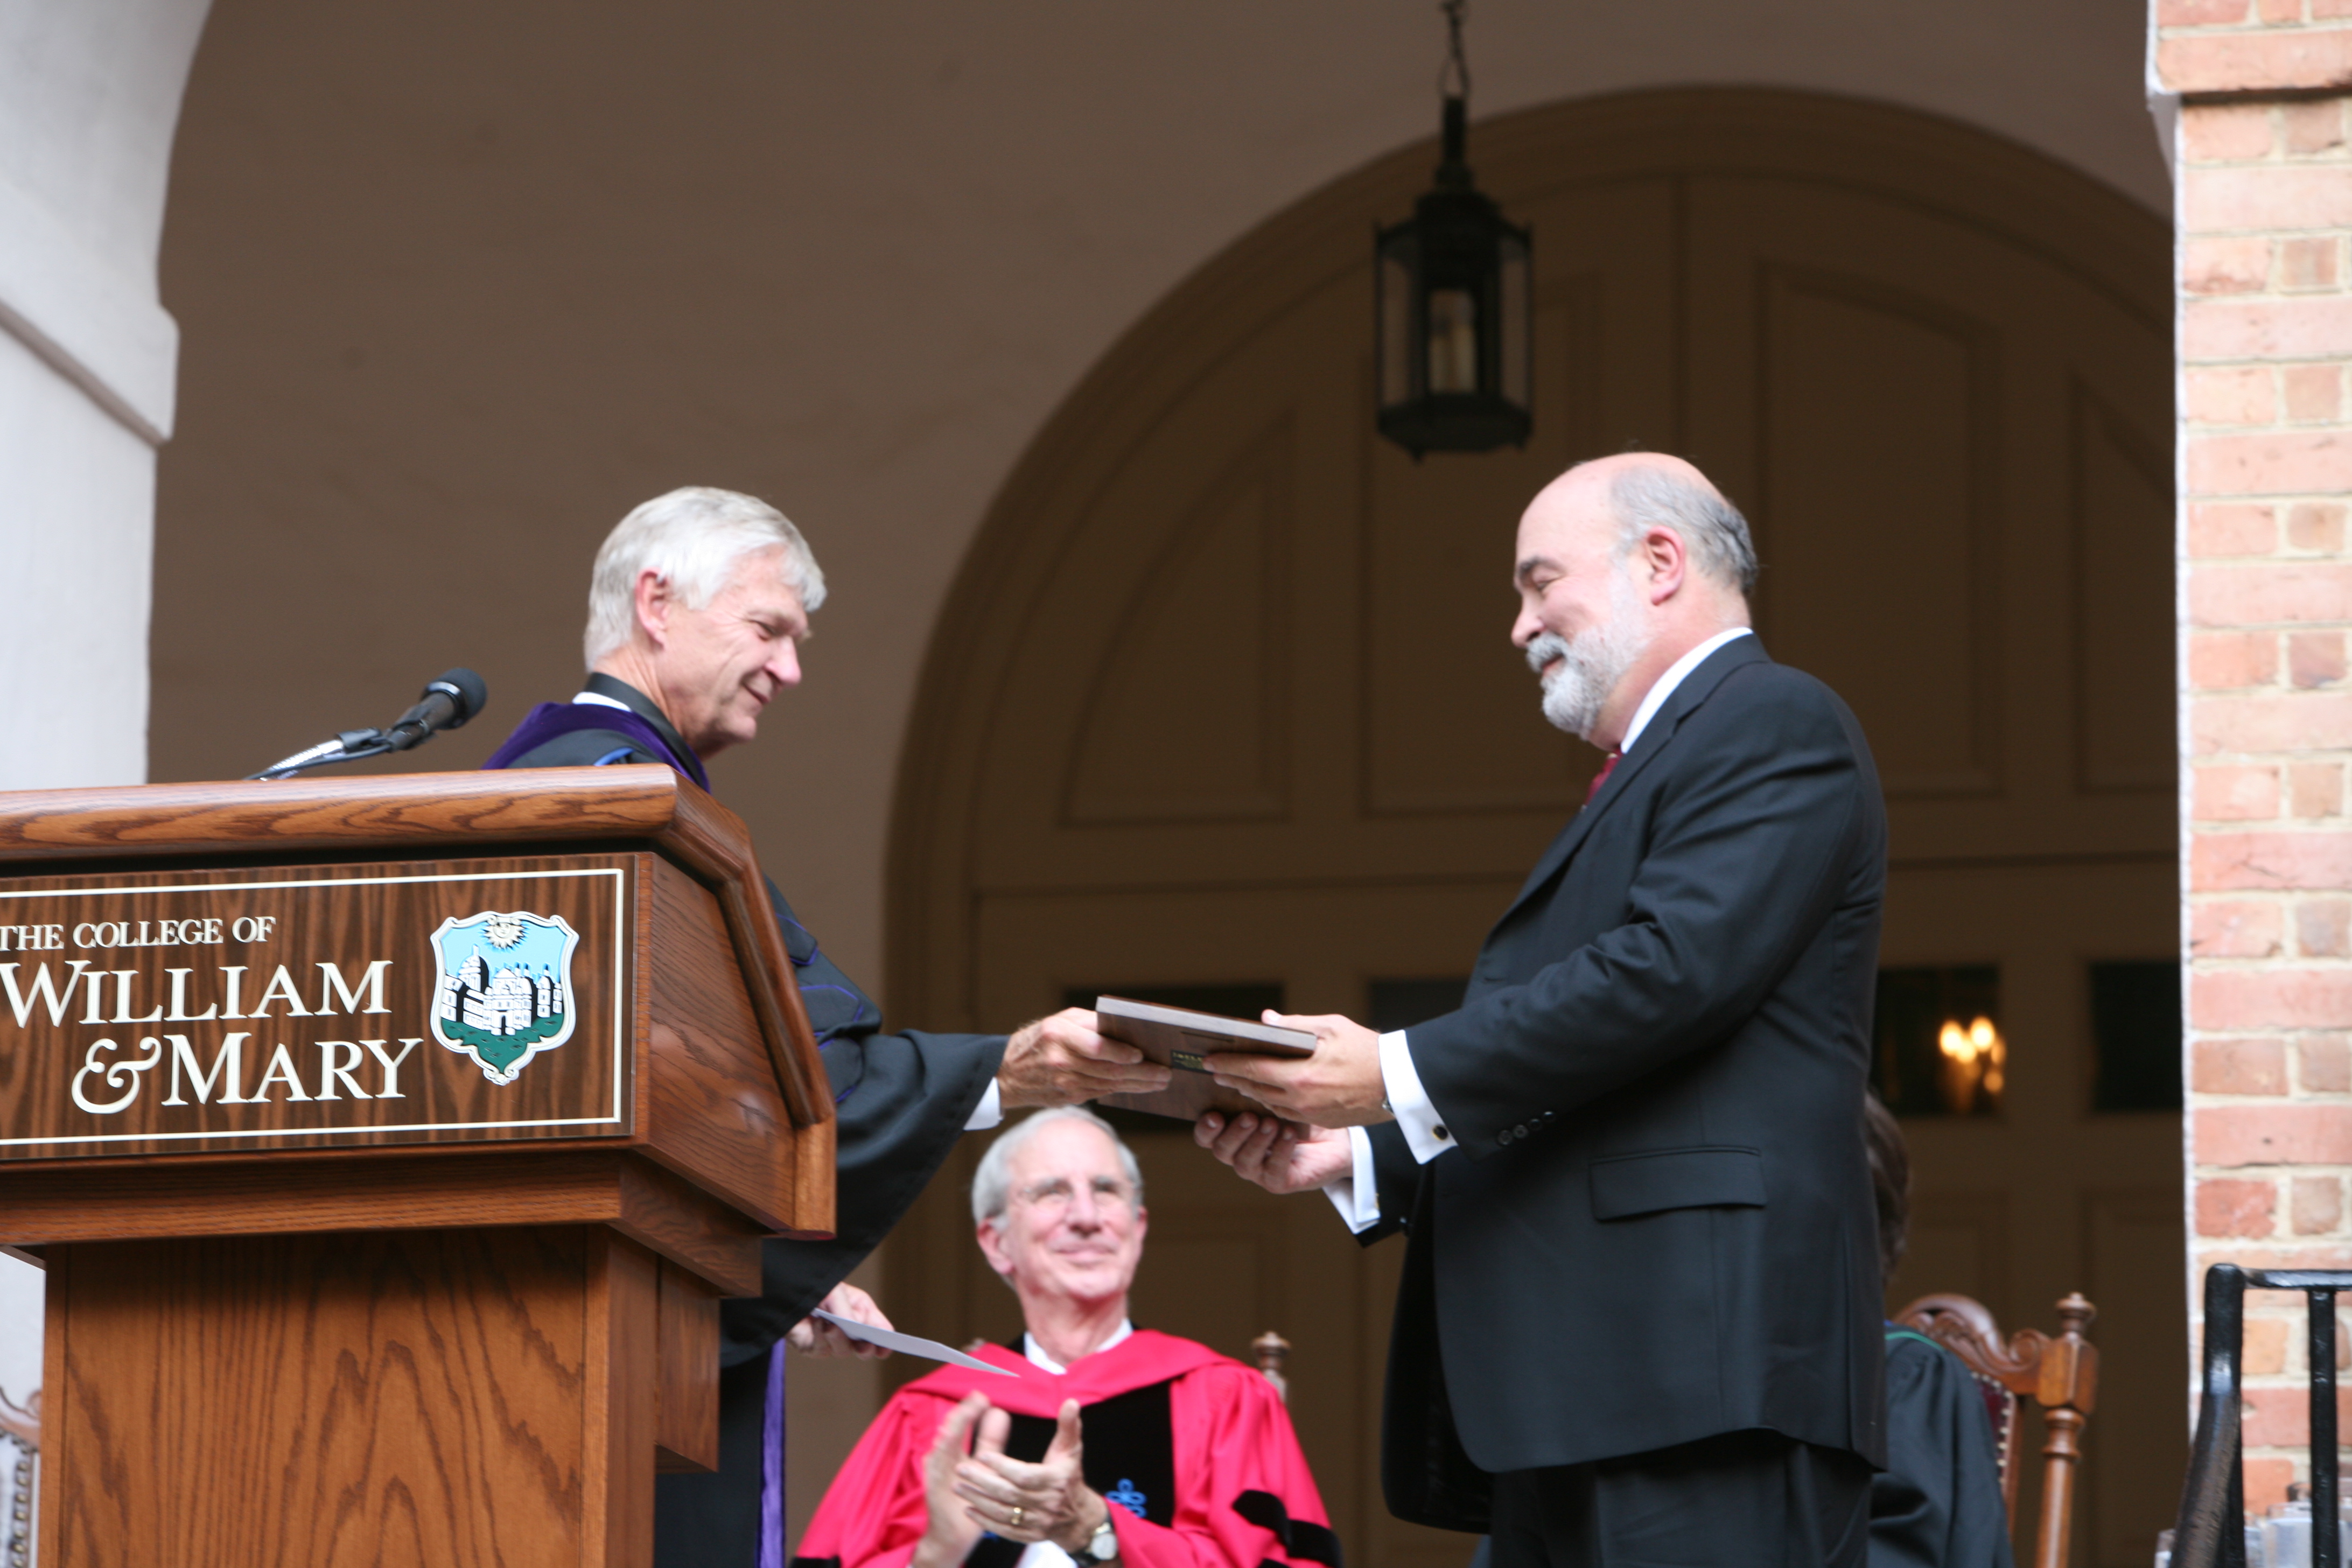 Prof. Taylor was honored with the President's Award for Service to the Community in 2008.  (Photo by Stephen Salpukas)